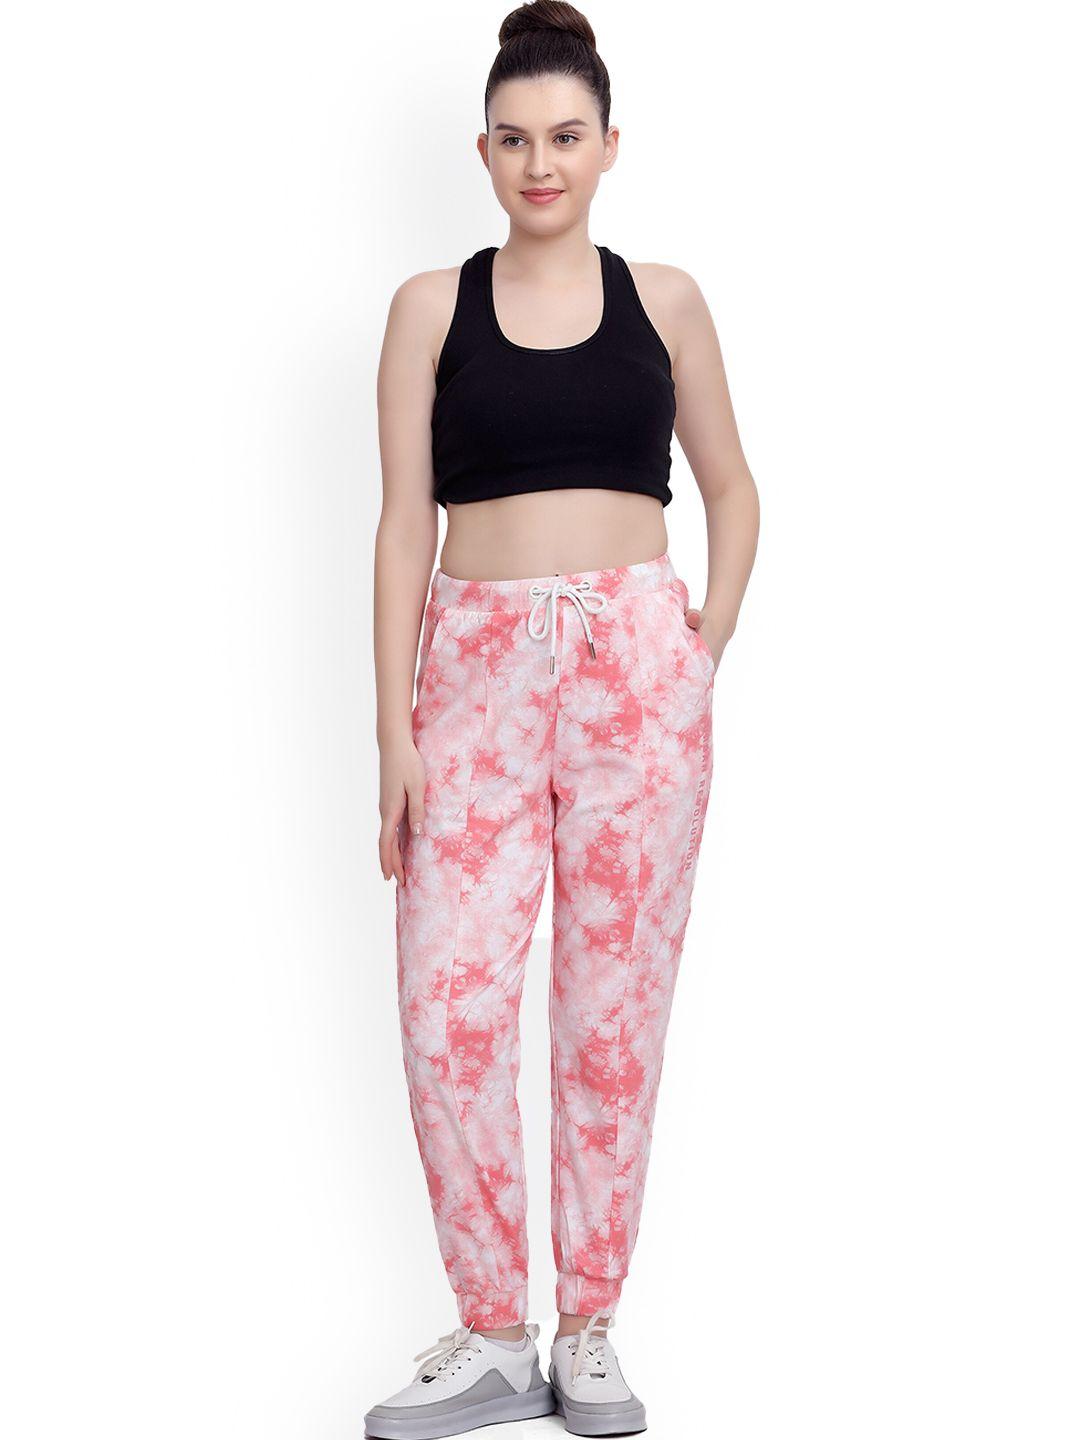 maysixty women pink & white tie & dye track joggers